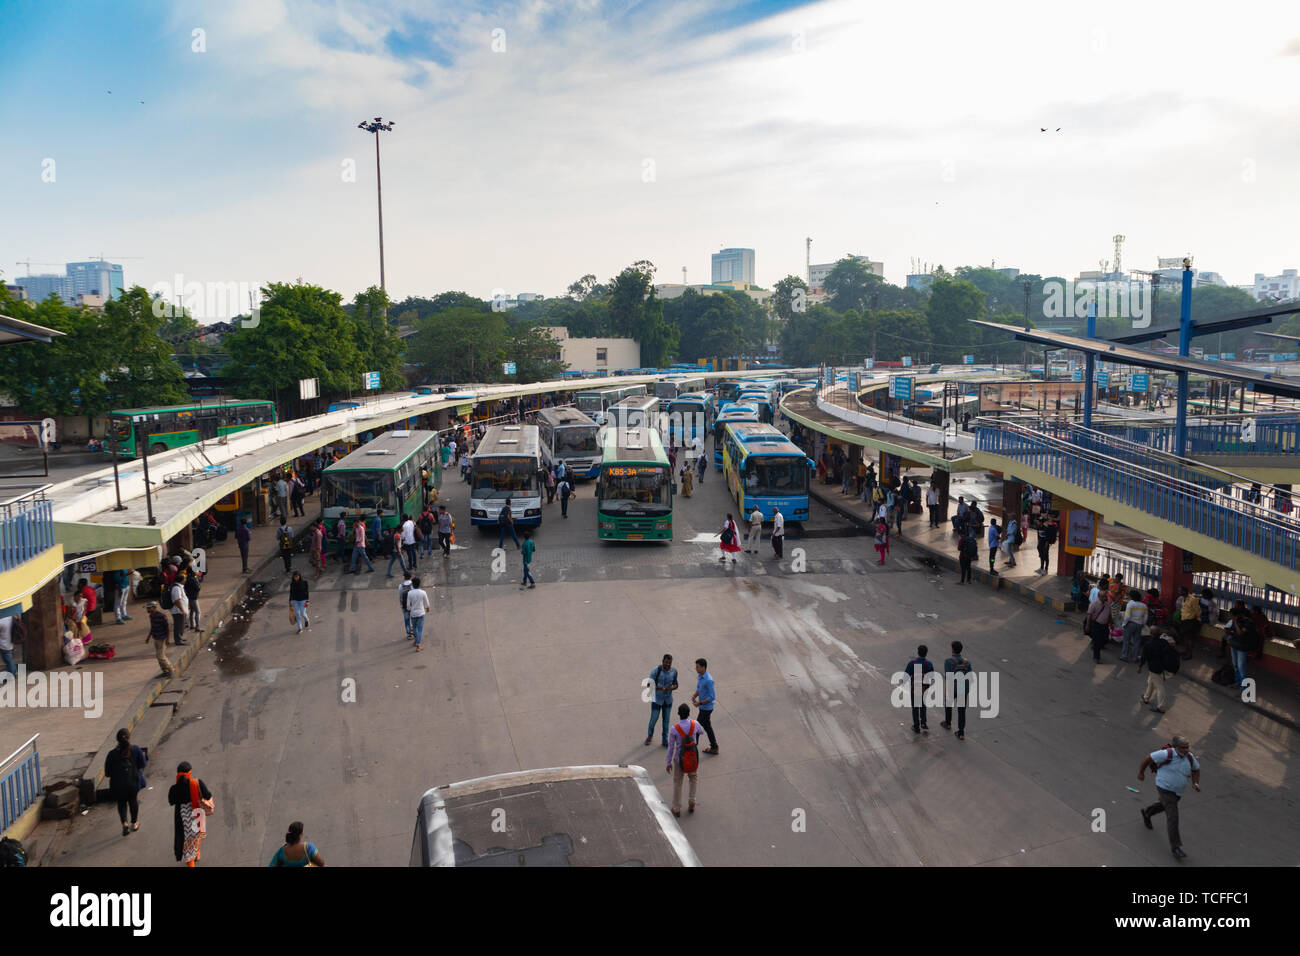 BANGALORE INDIA June 3, 2019:Buses in the Kempegowda Bus Station known as Majestic during morning time traffic congestion Stock Photo